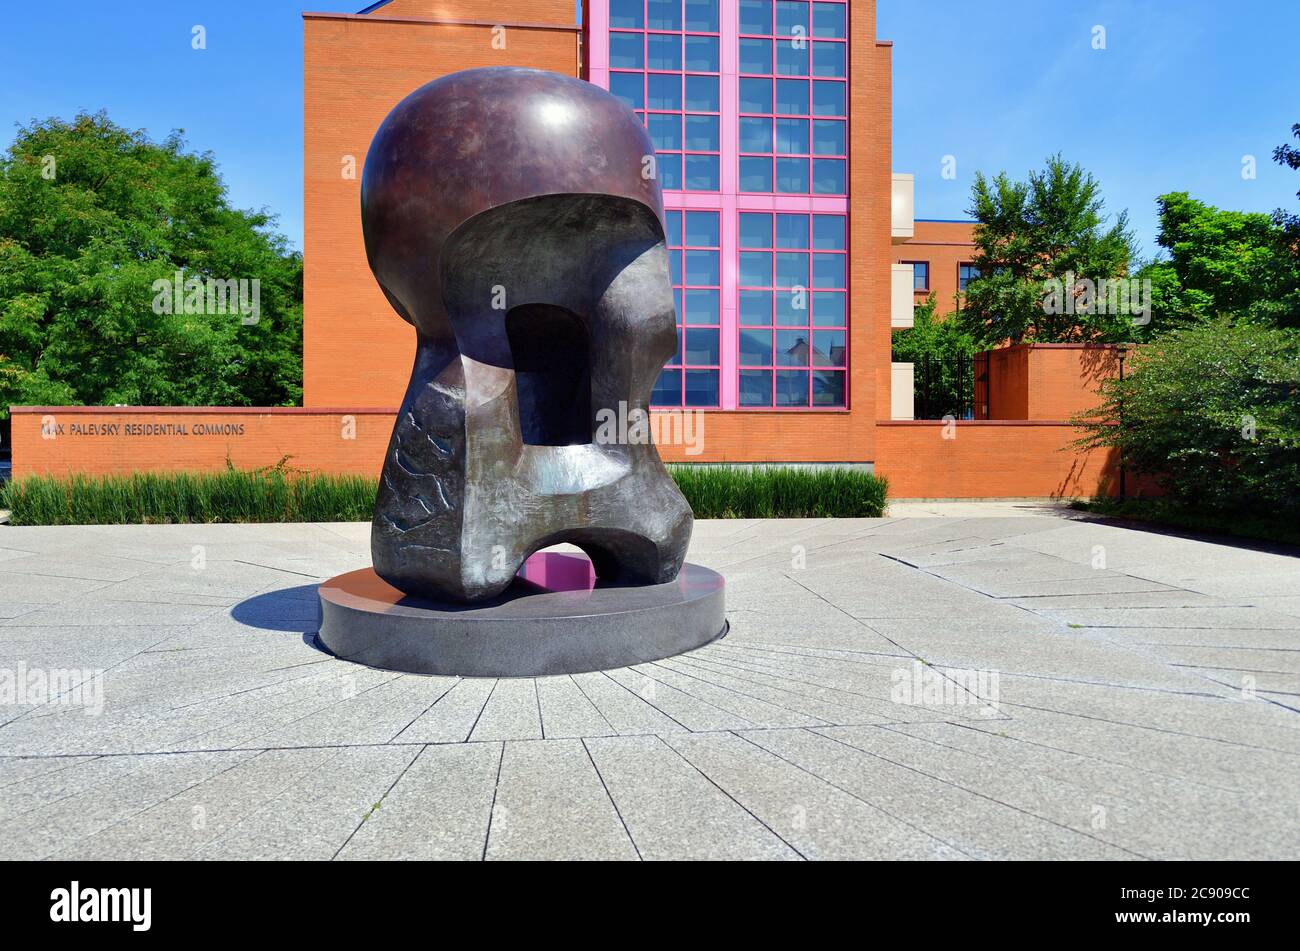 Chicago, Illinois, USA. The sculpture 'Nuclear Energy' by Henry Moore on the campus of the University of Chicago. Stock Photo